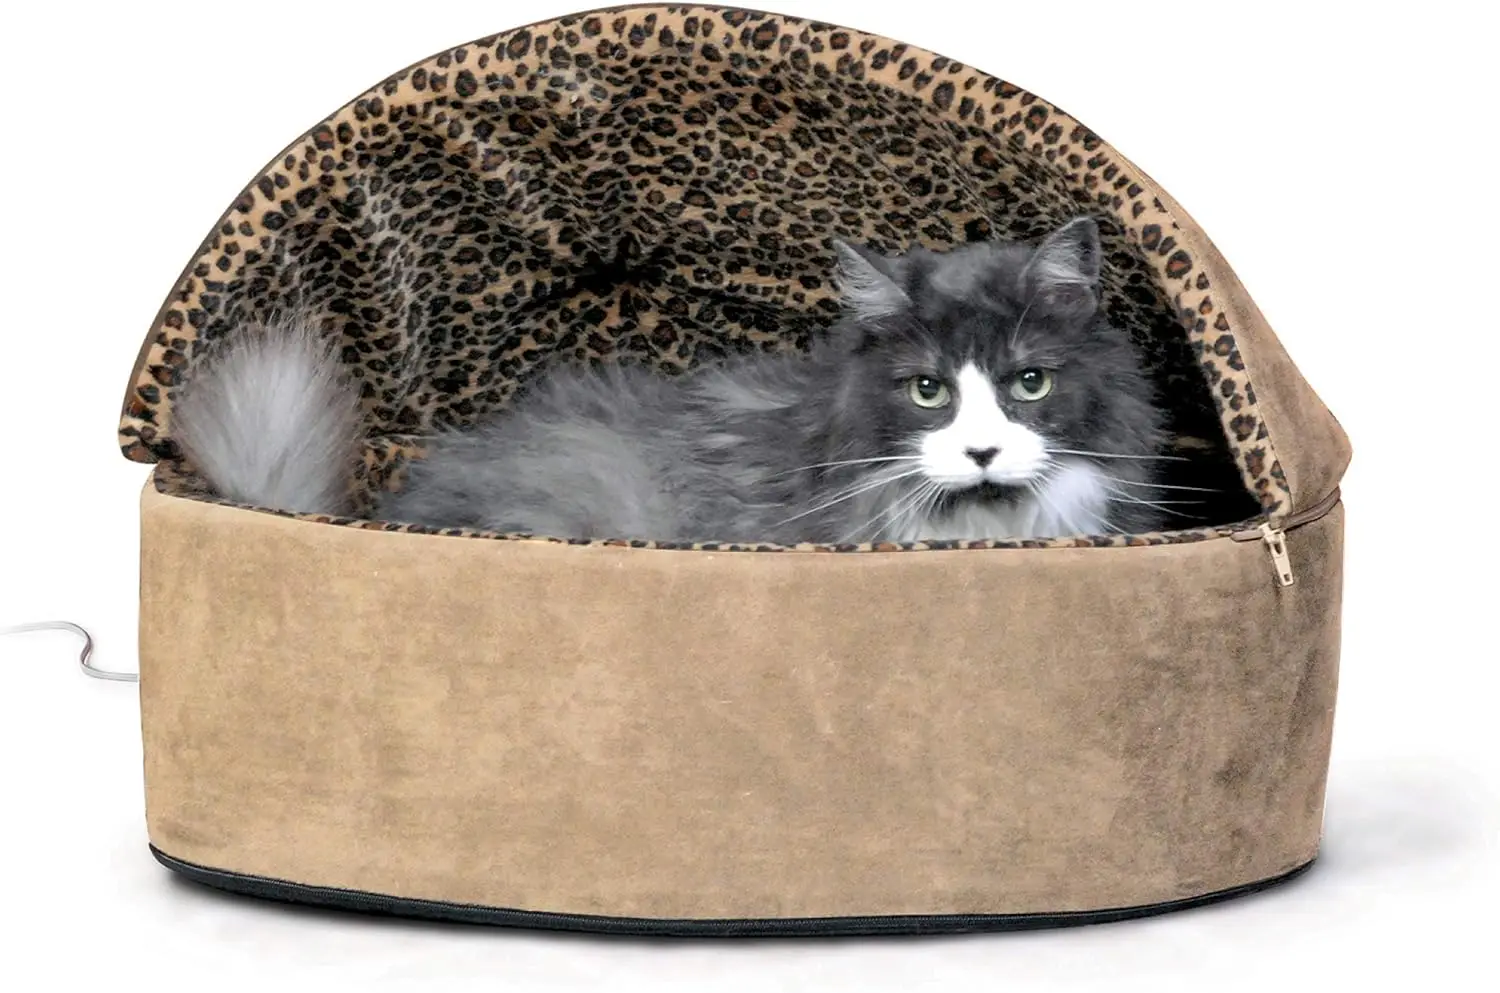 

Pet Products Thermo-Kitty Bed Indoor Heated Cat Bed Tan/Leopard Large 20 Inches Cat mouse pad Cat houses free shipping Japanese